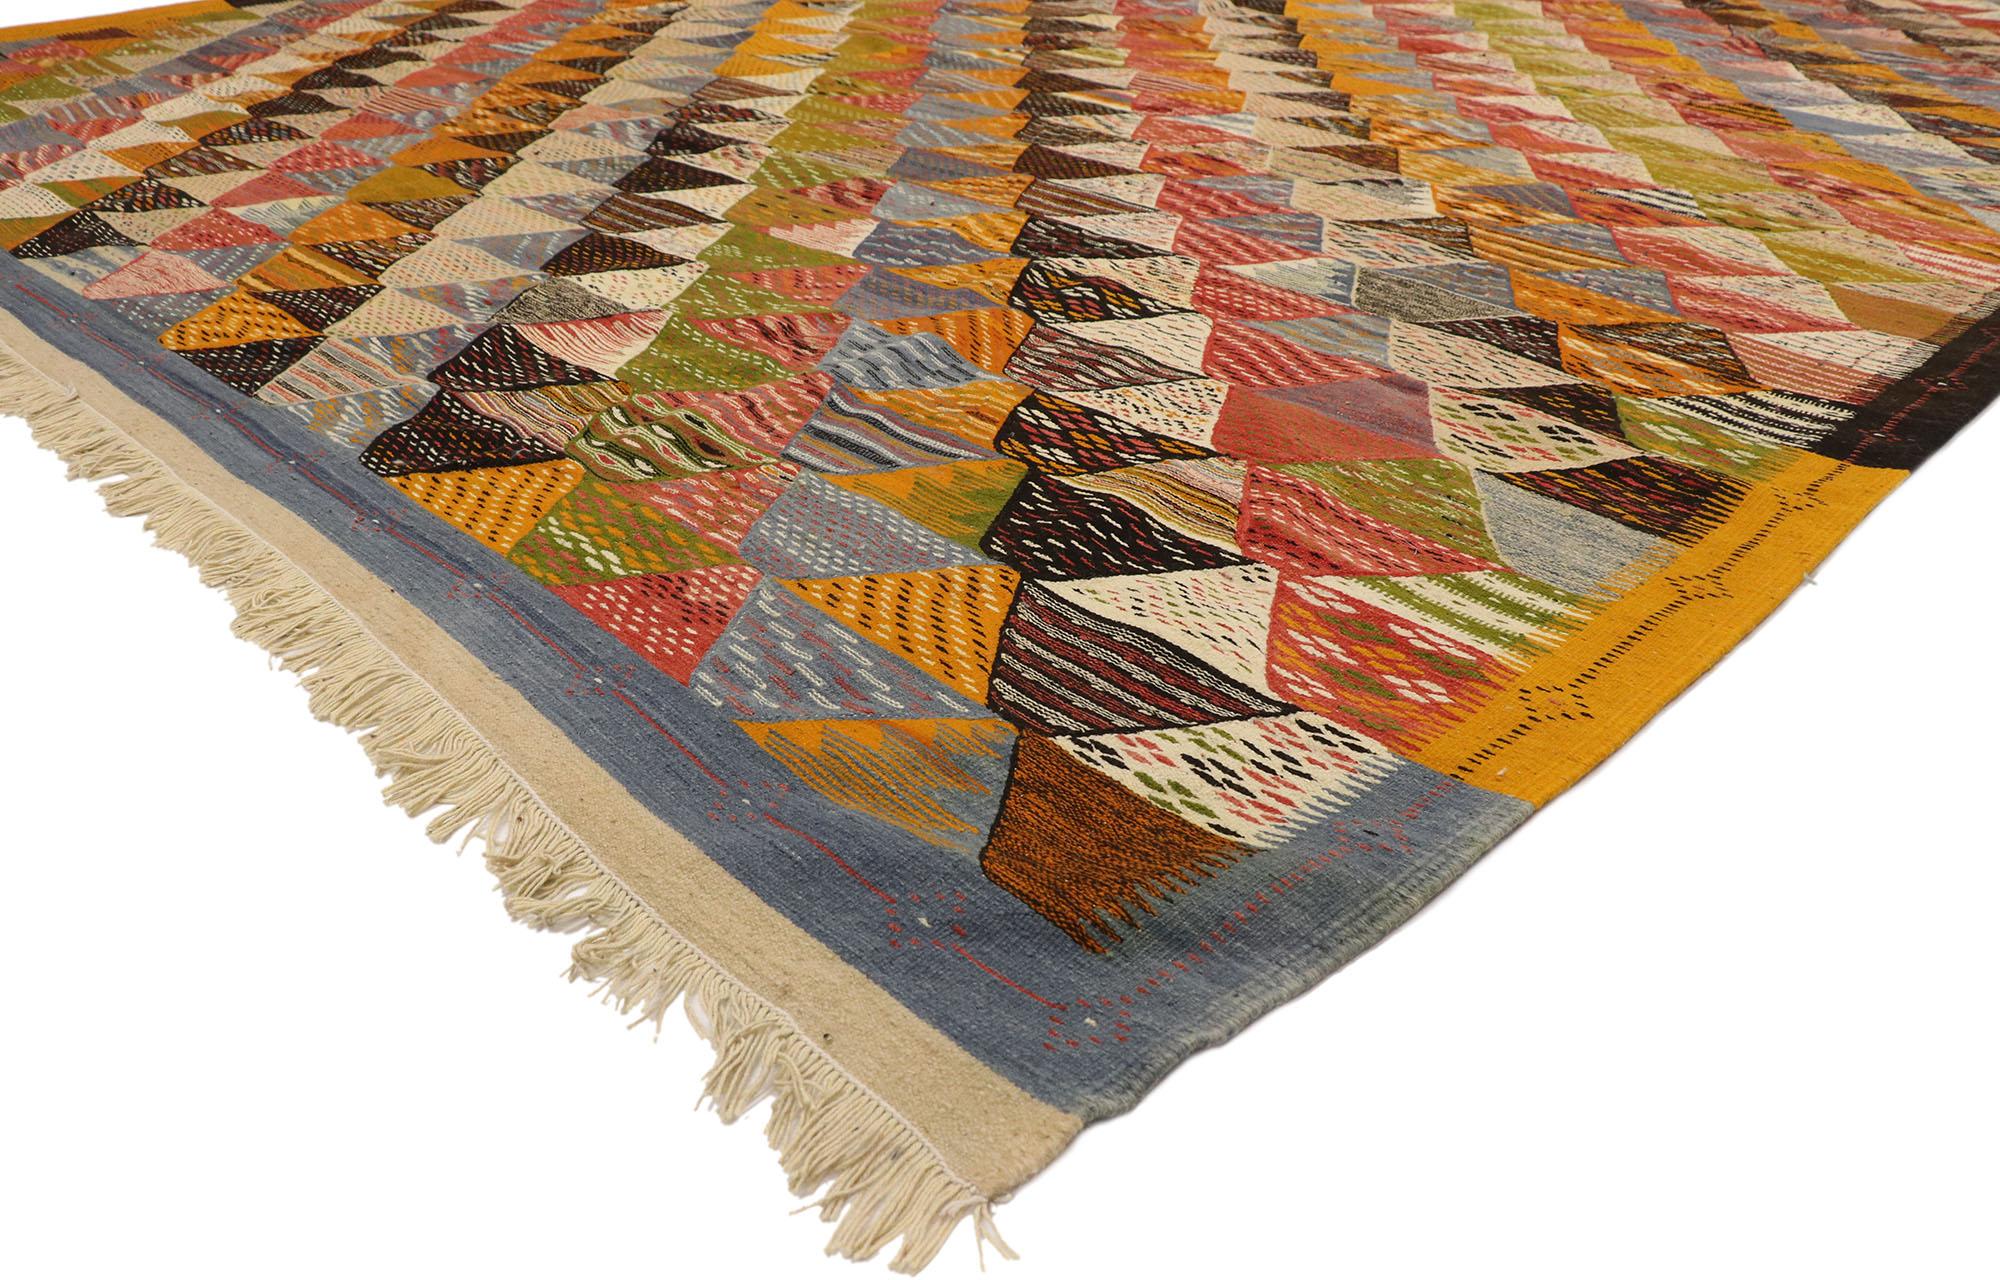 20912, new contemporary Berber Moroccan Kilim rug, modern cabin style flat-weave rug. With its bold expressive design, incredible detail and texture, this contemporary Berber Moroccan kilim rug is a captivating vision of woven beauty. It features an